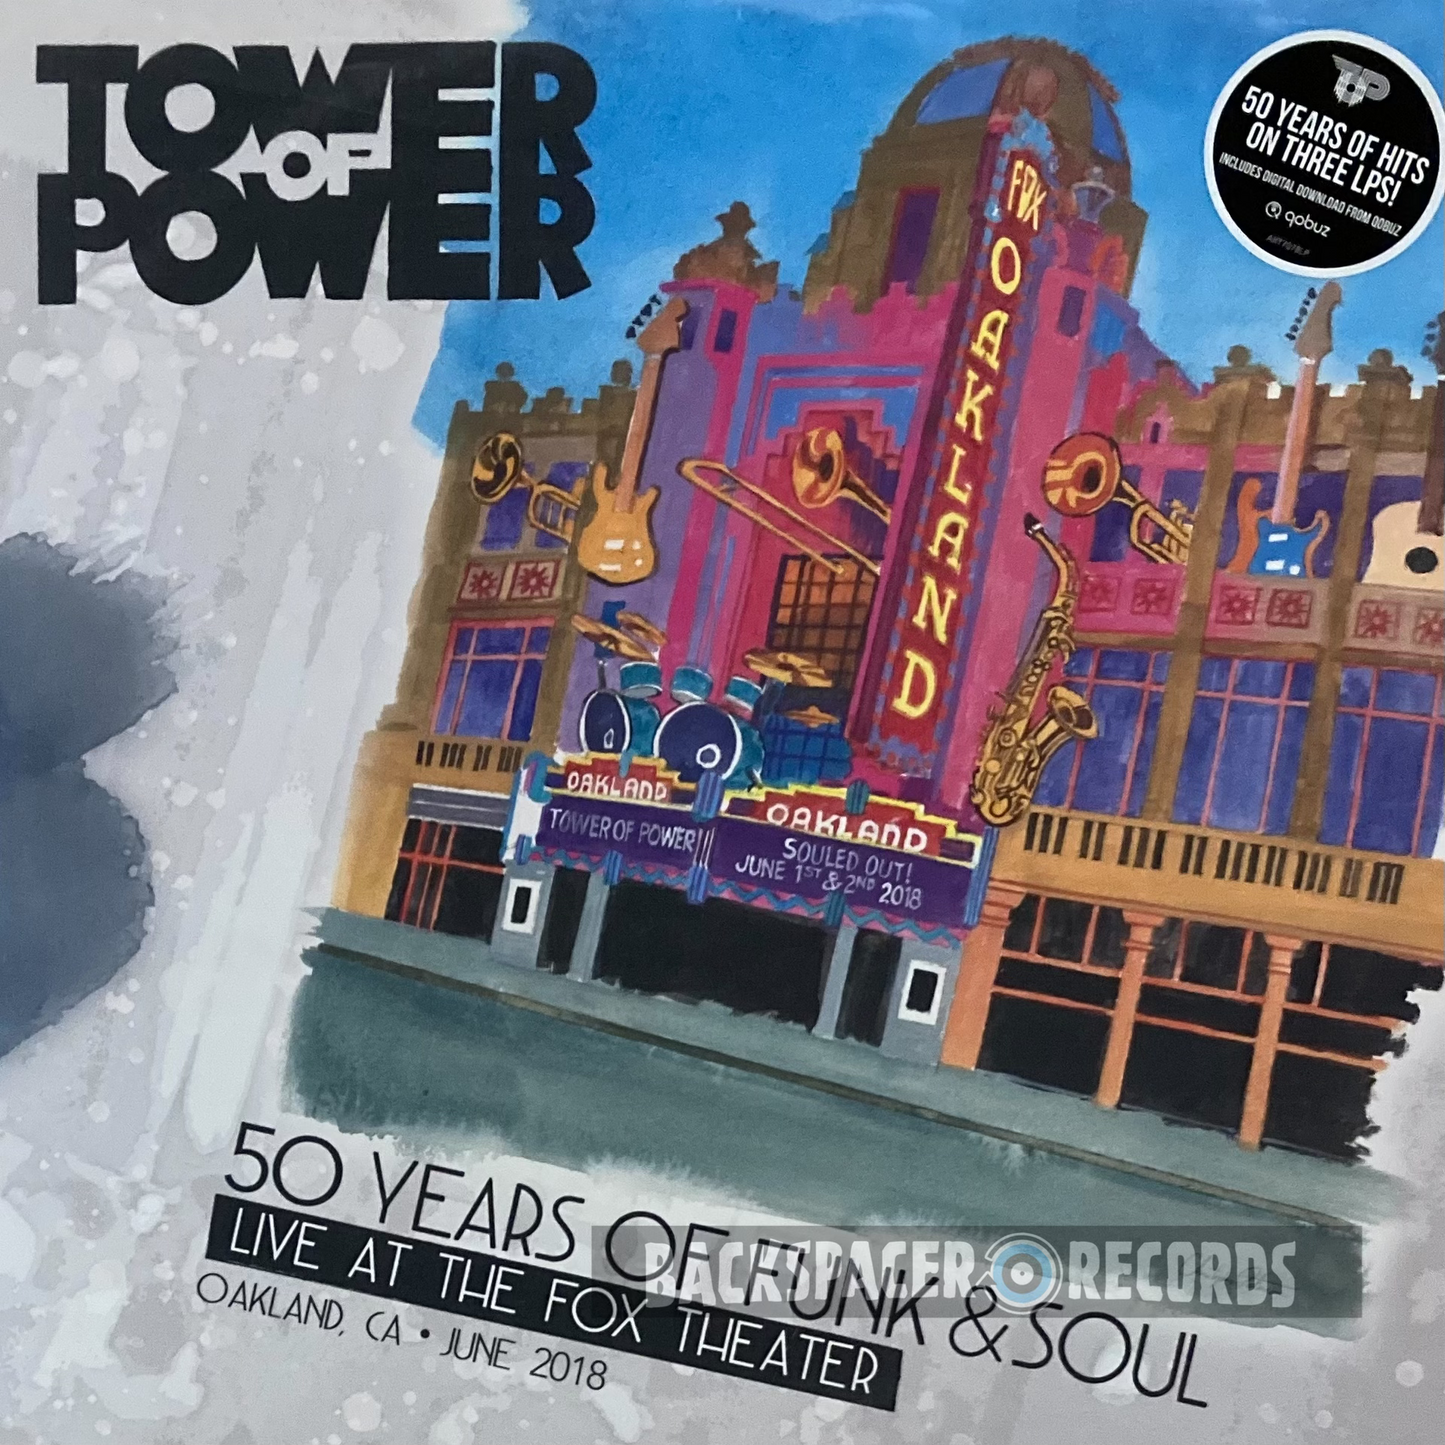 Tower Of Power – 50 Years Of Funk & Soul: Live At The Fox Theater Oakland CA June 2018 3-LP